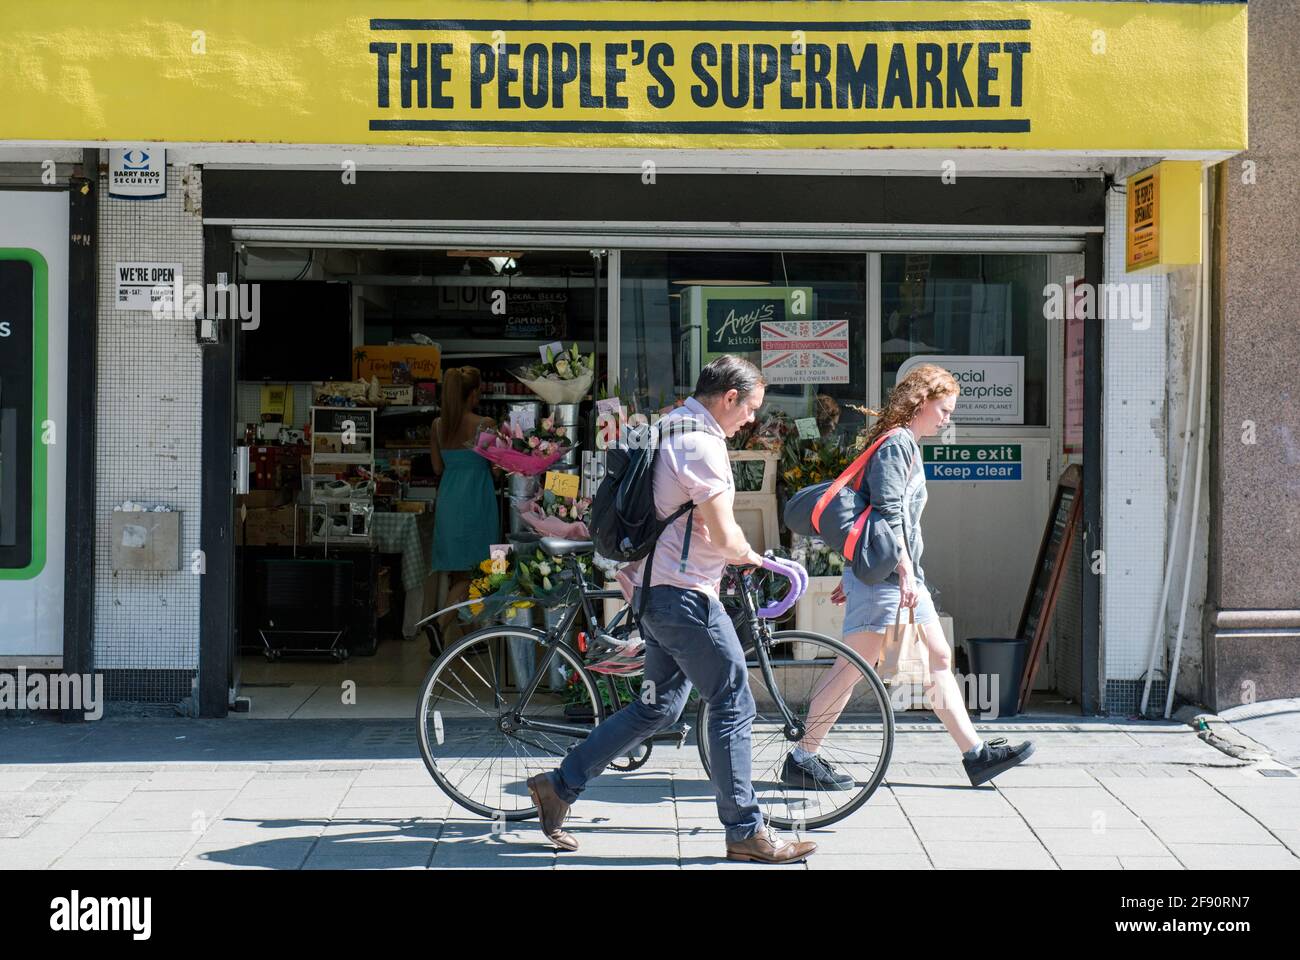 The People's Supermarket with people passing, Lamb's Conduit St, Holborn, London Borough of Camden, England, Britain, UK Stock Photo